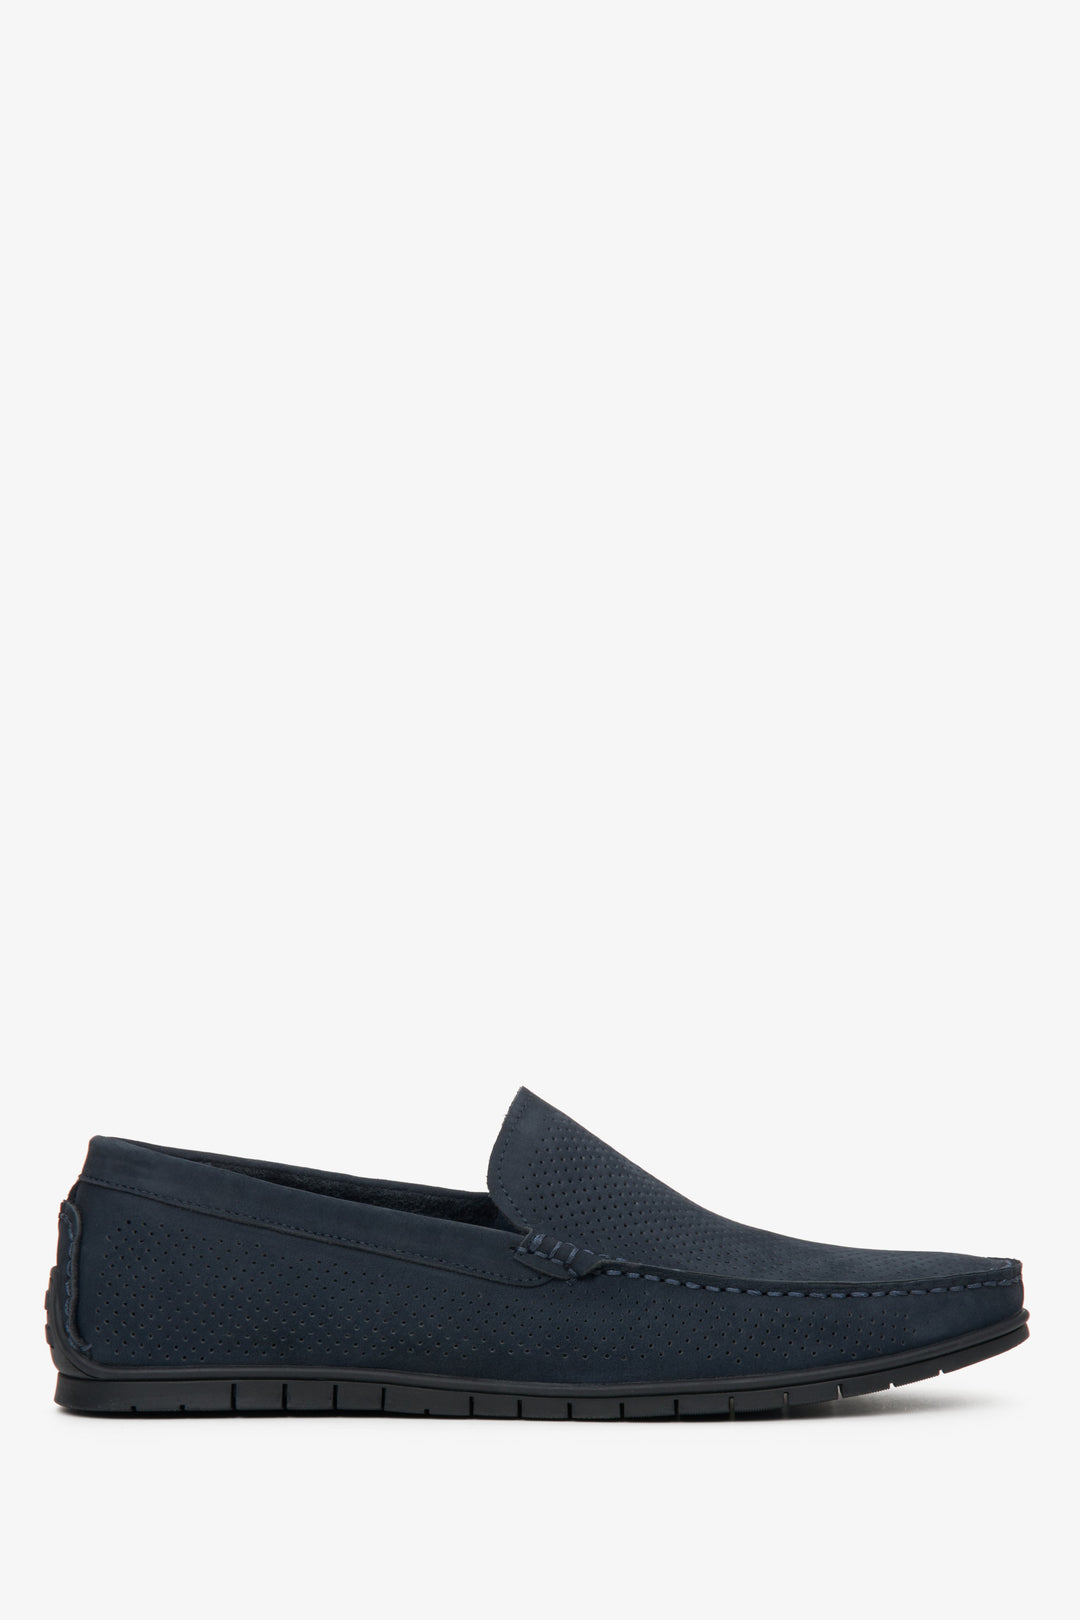 Men's Navy Blue Nubuck Loafers for Fall with Perforation Estro ER00112554.